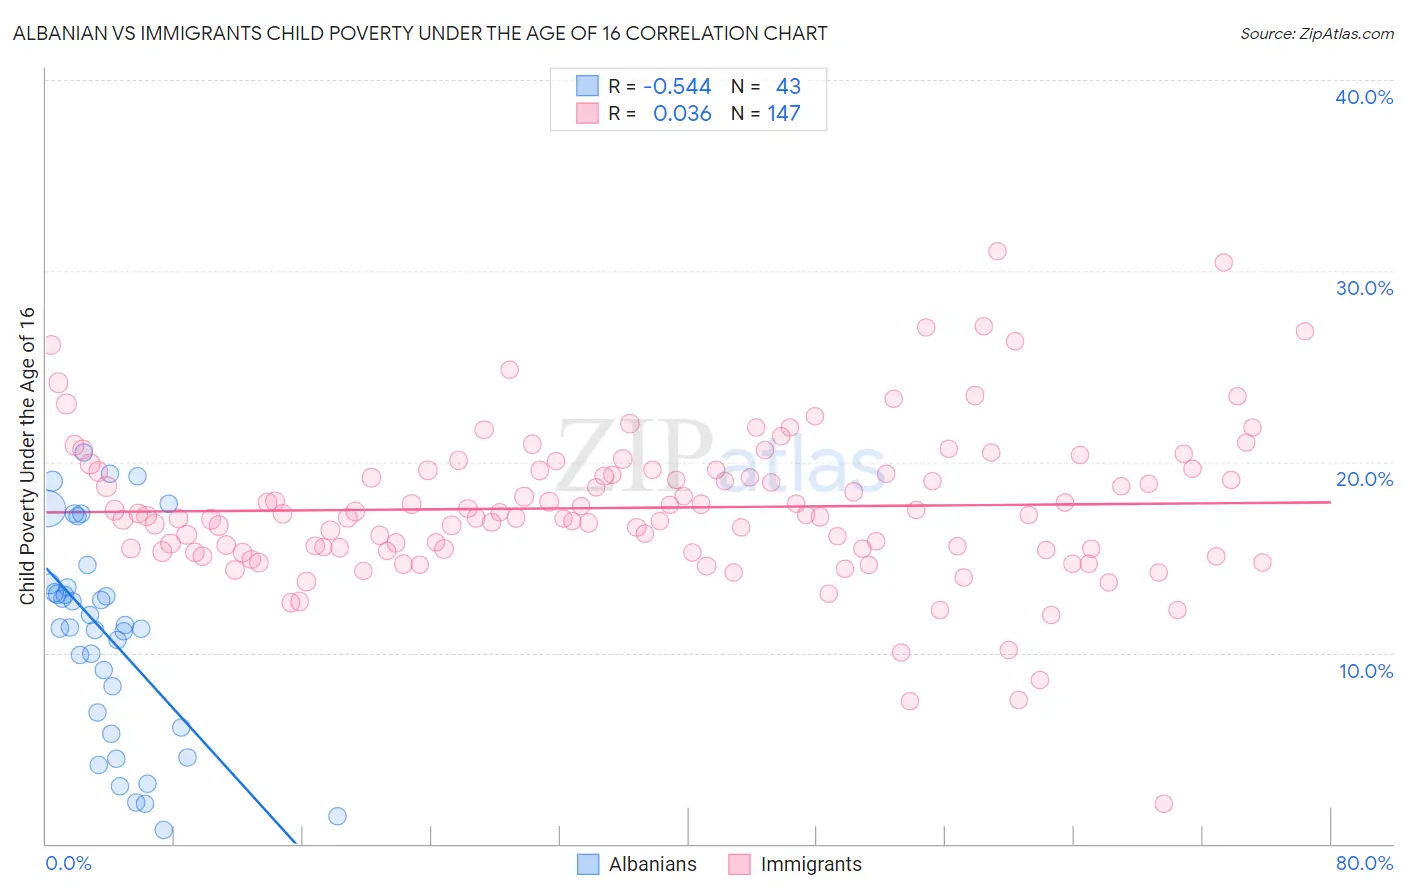 Albanian vs Immigrants Child Poverty Under the Age of 16